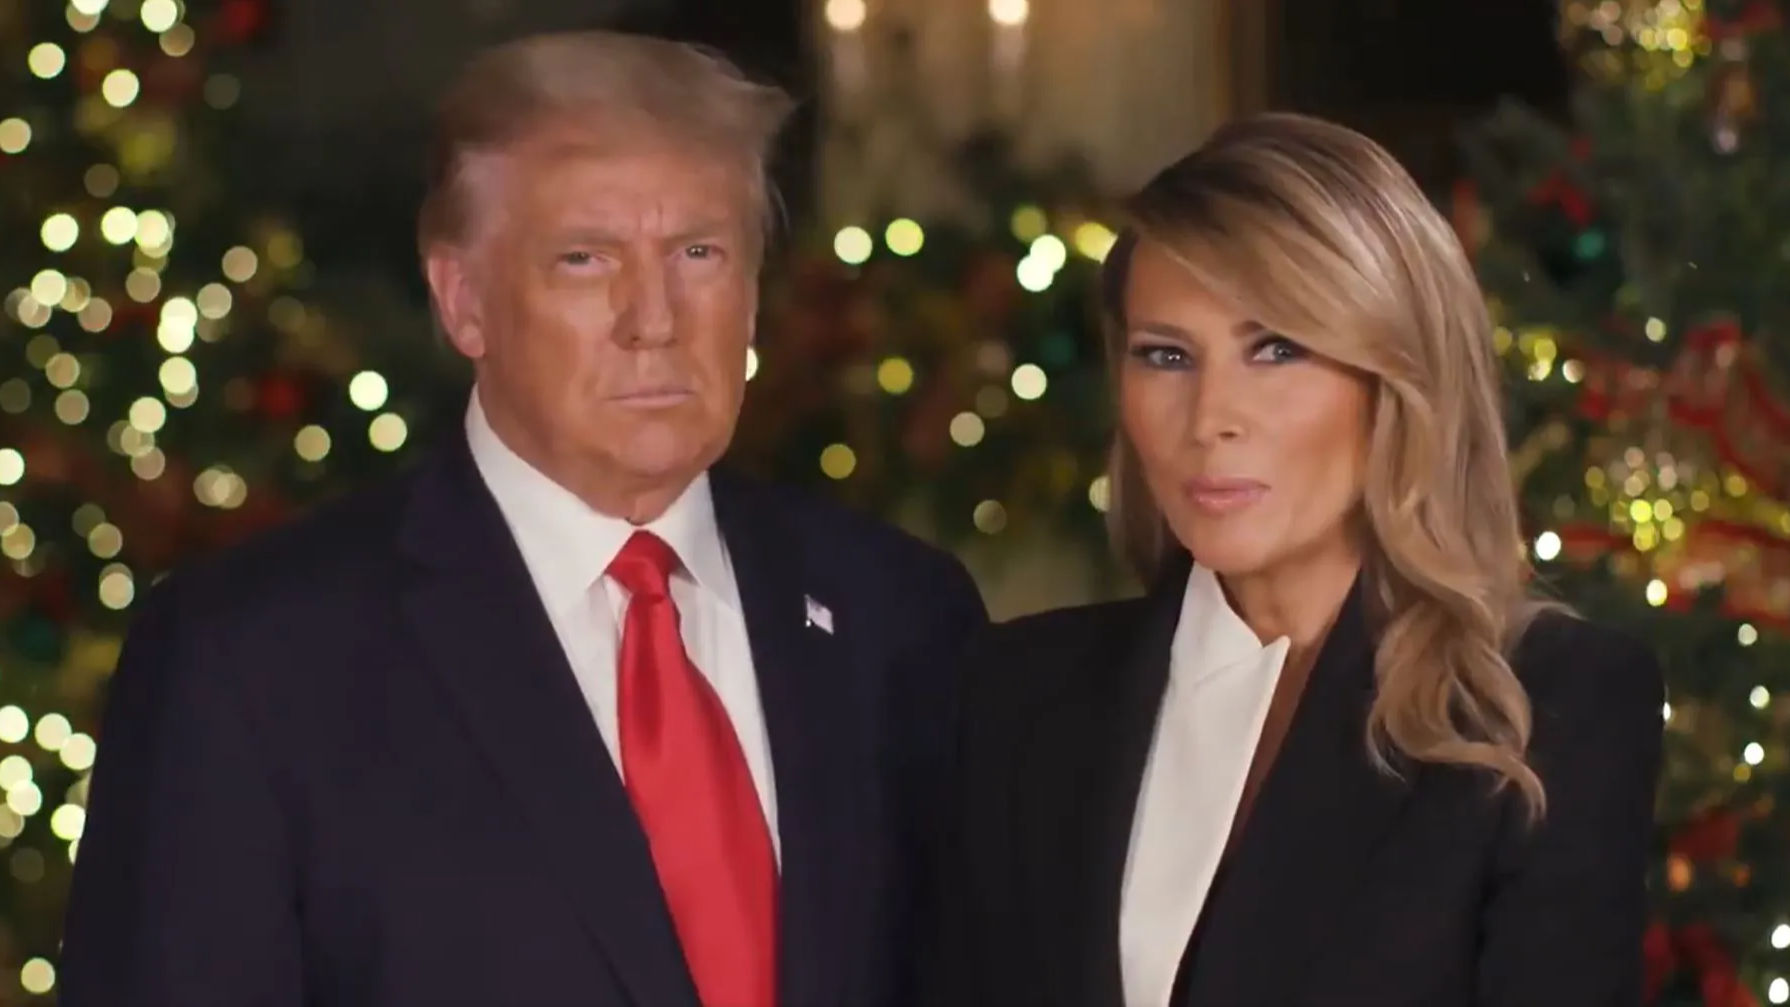 President Trump and First Lady wish Americans ‘Merry Christmas’